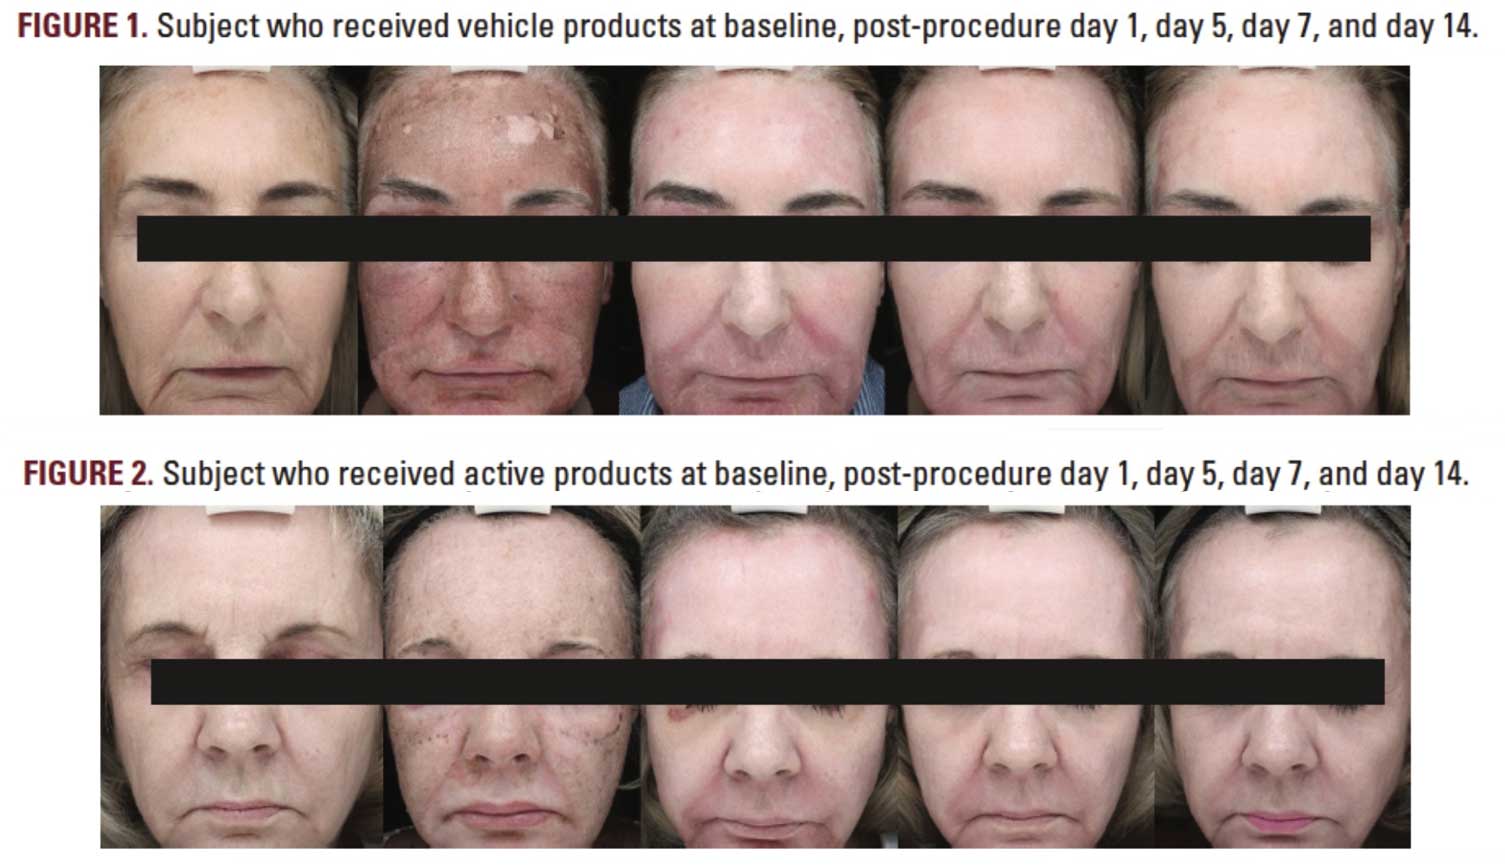 Subject who received vehicle VS active products at baseline, post-procedure day 1, day 5, day 7 and day 14